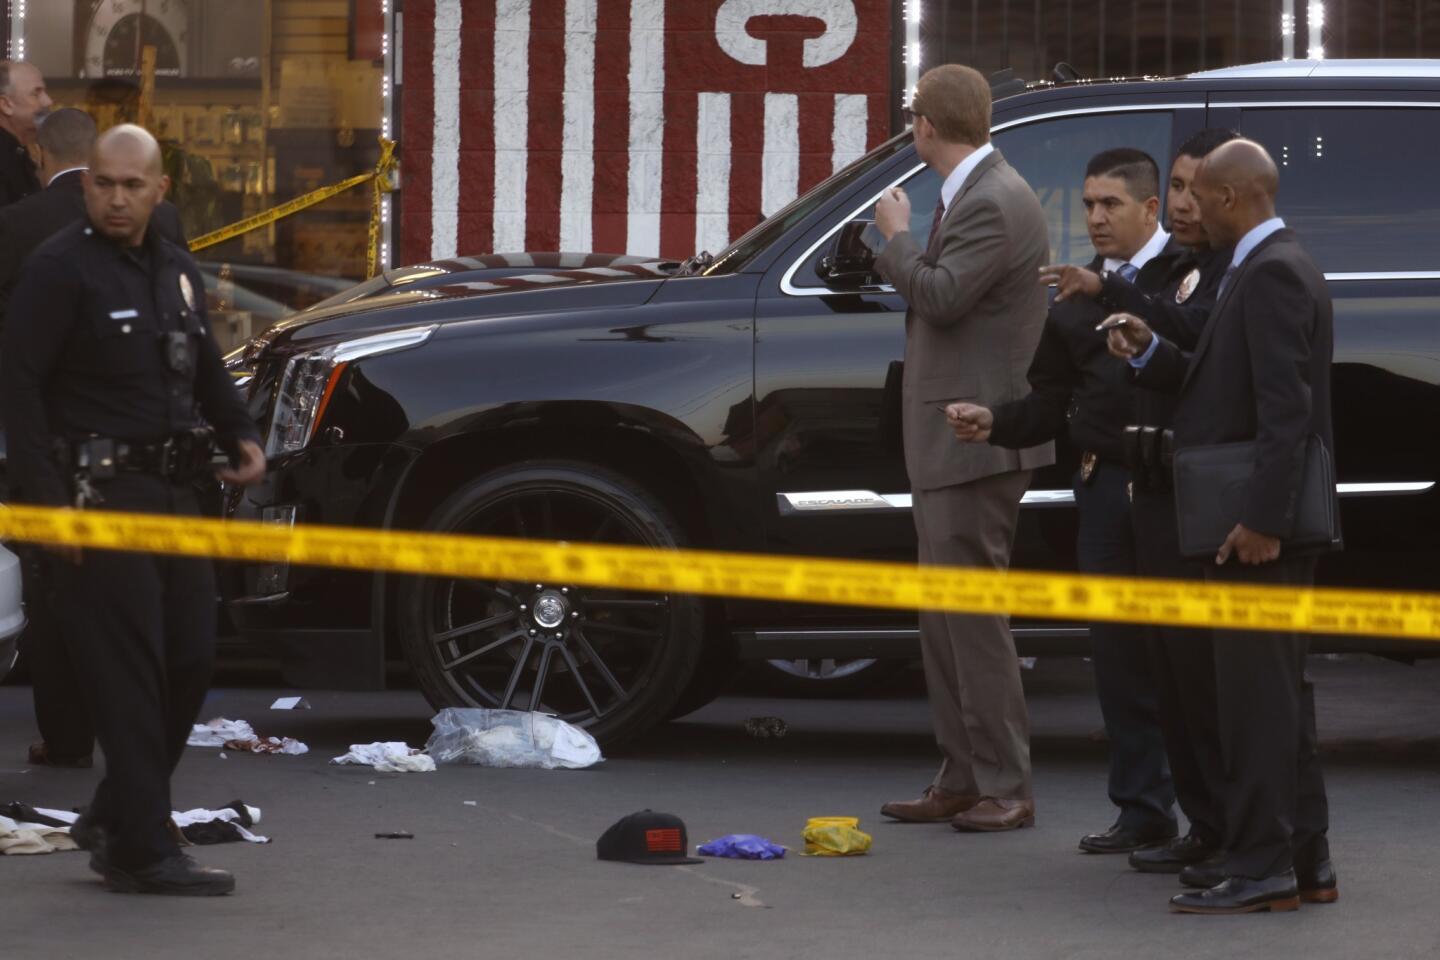 Nipsey Hussle posted chilling final tweet about 'strong enemies' before  being shot dead outside in LA on day he was due to meet with cops about  gang violence